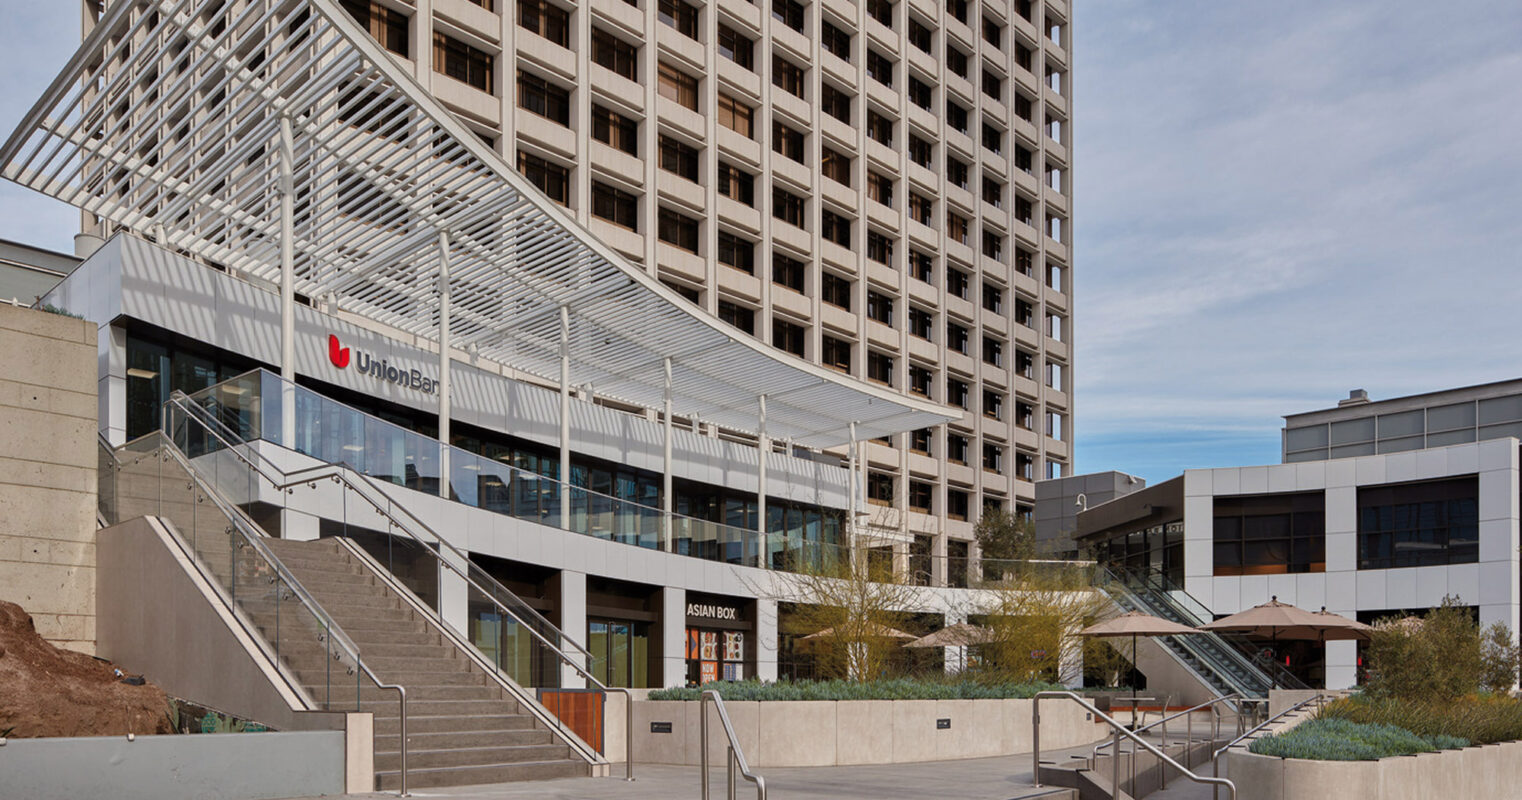 Modern urban staircase leading up to an elevated plaza with geometric metal canopy, flanked by a multi-story building and landscaped areas, under a partly cloudy sky.